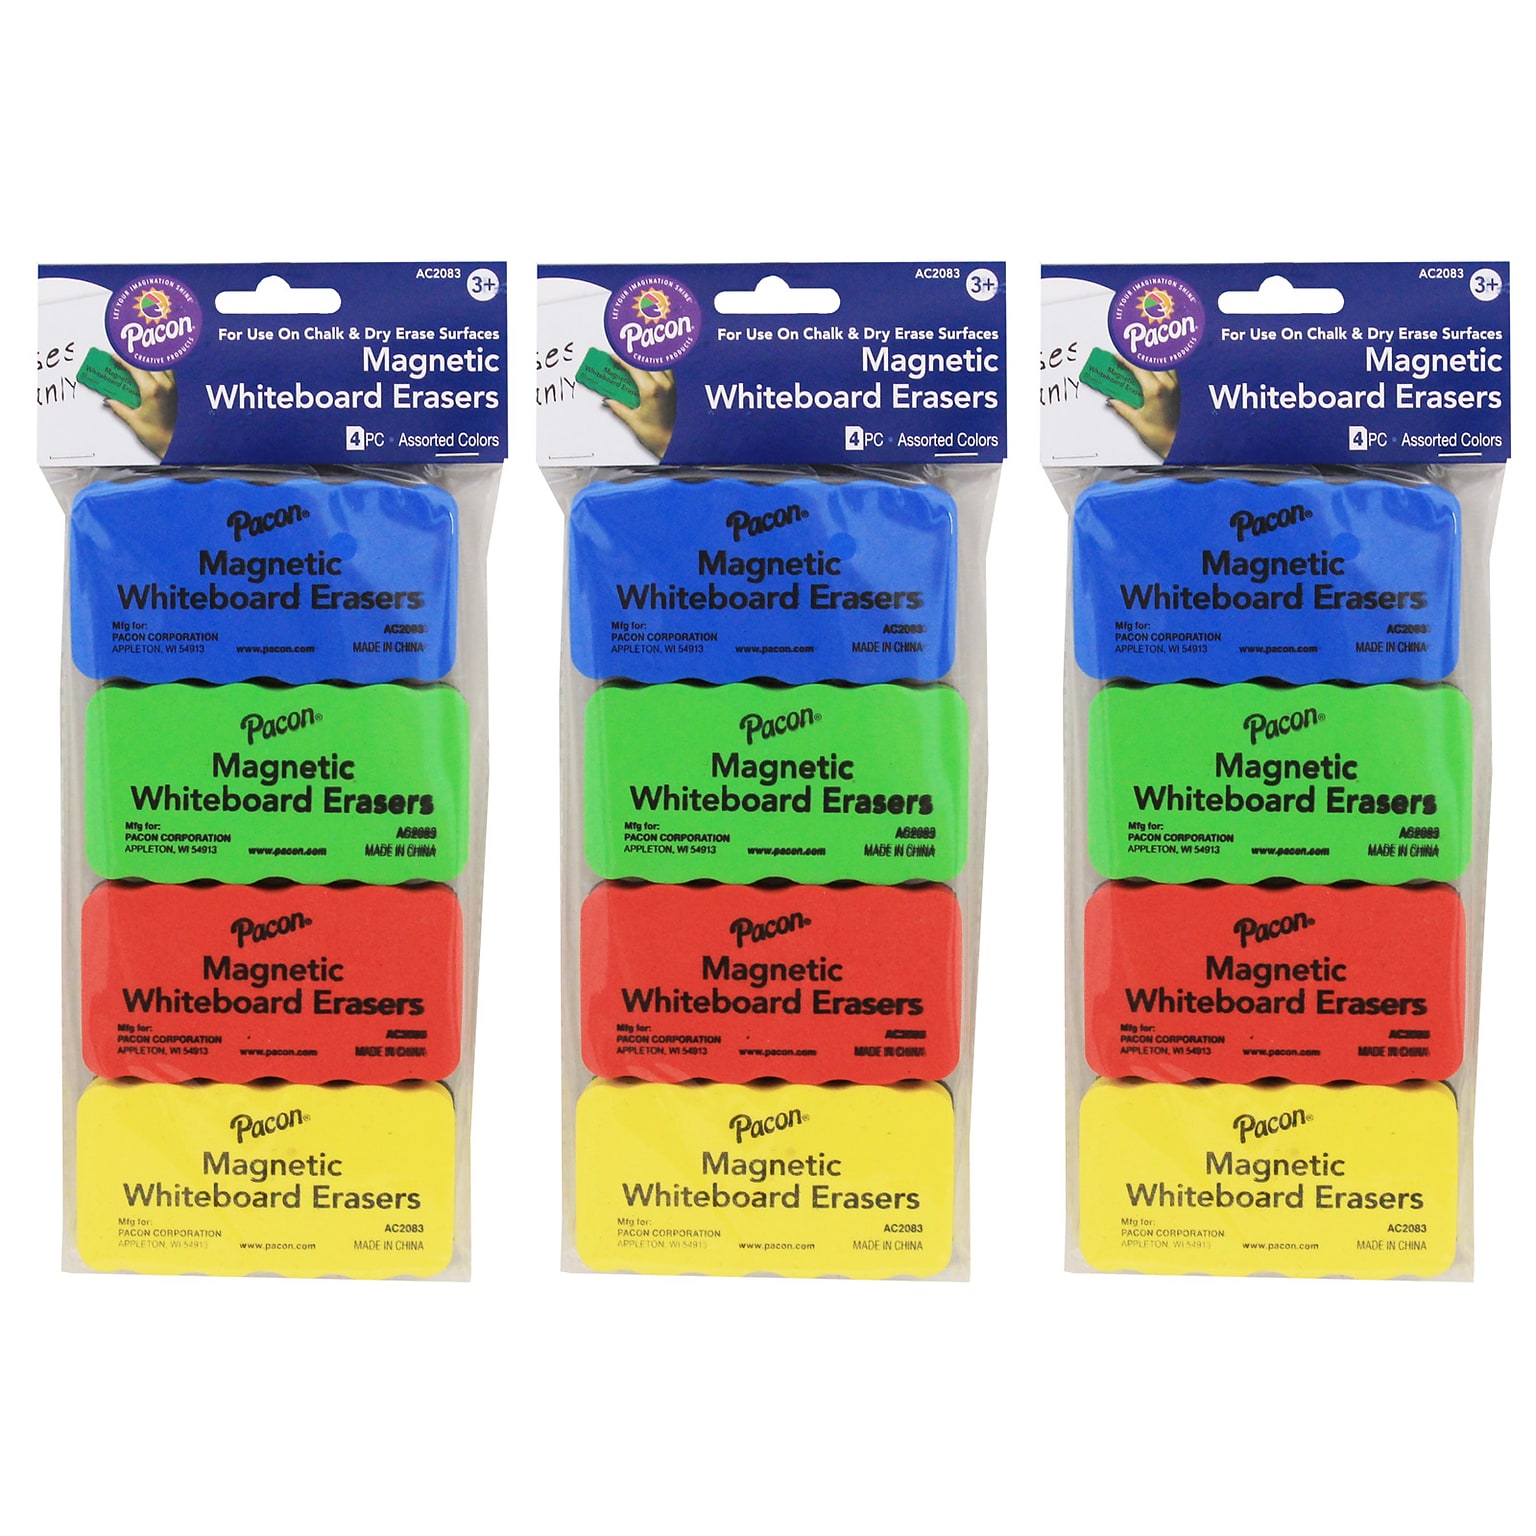 Pacon® Magnetic Chalk & Whiteboard Eraser, 2.25 x 4.25, 4 Assorted Colors, 4 Erasers Per Pack, 3 Packs (PACAC2083-3)